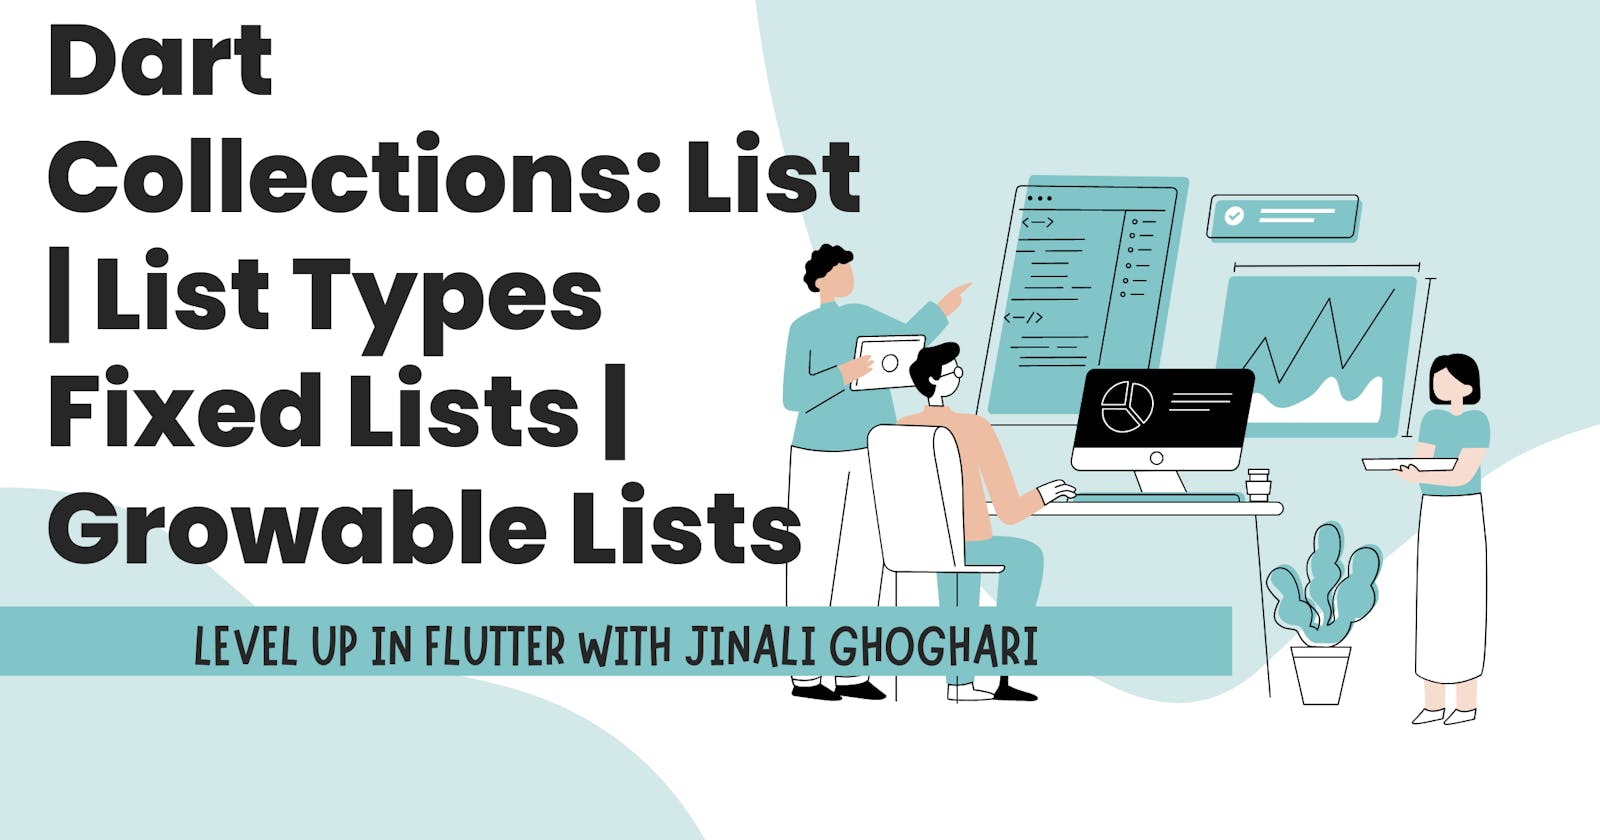 Dart Collections: List | List Types Fixed Lists | Growable Lists